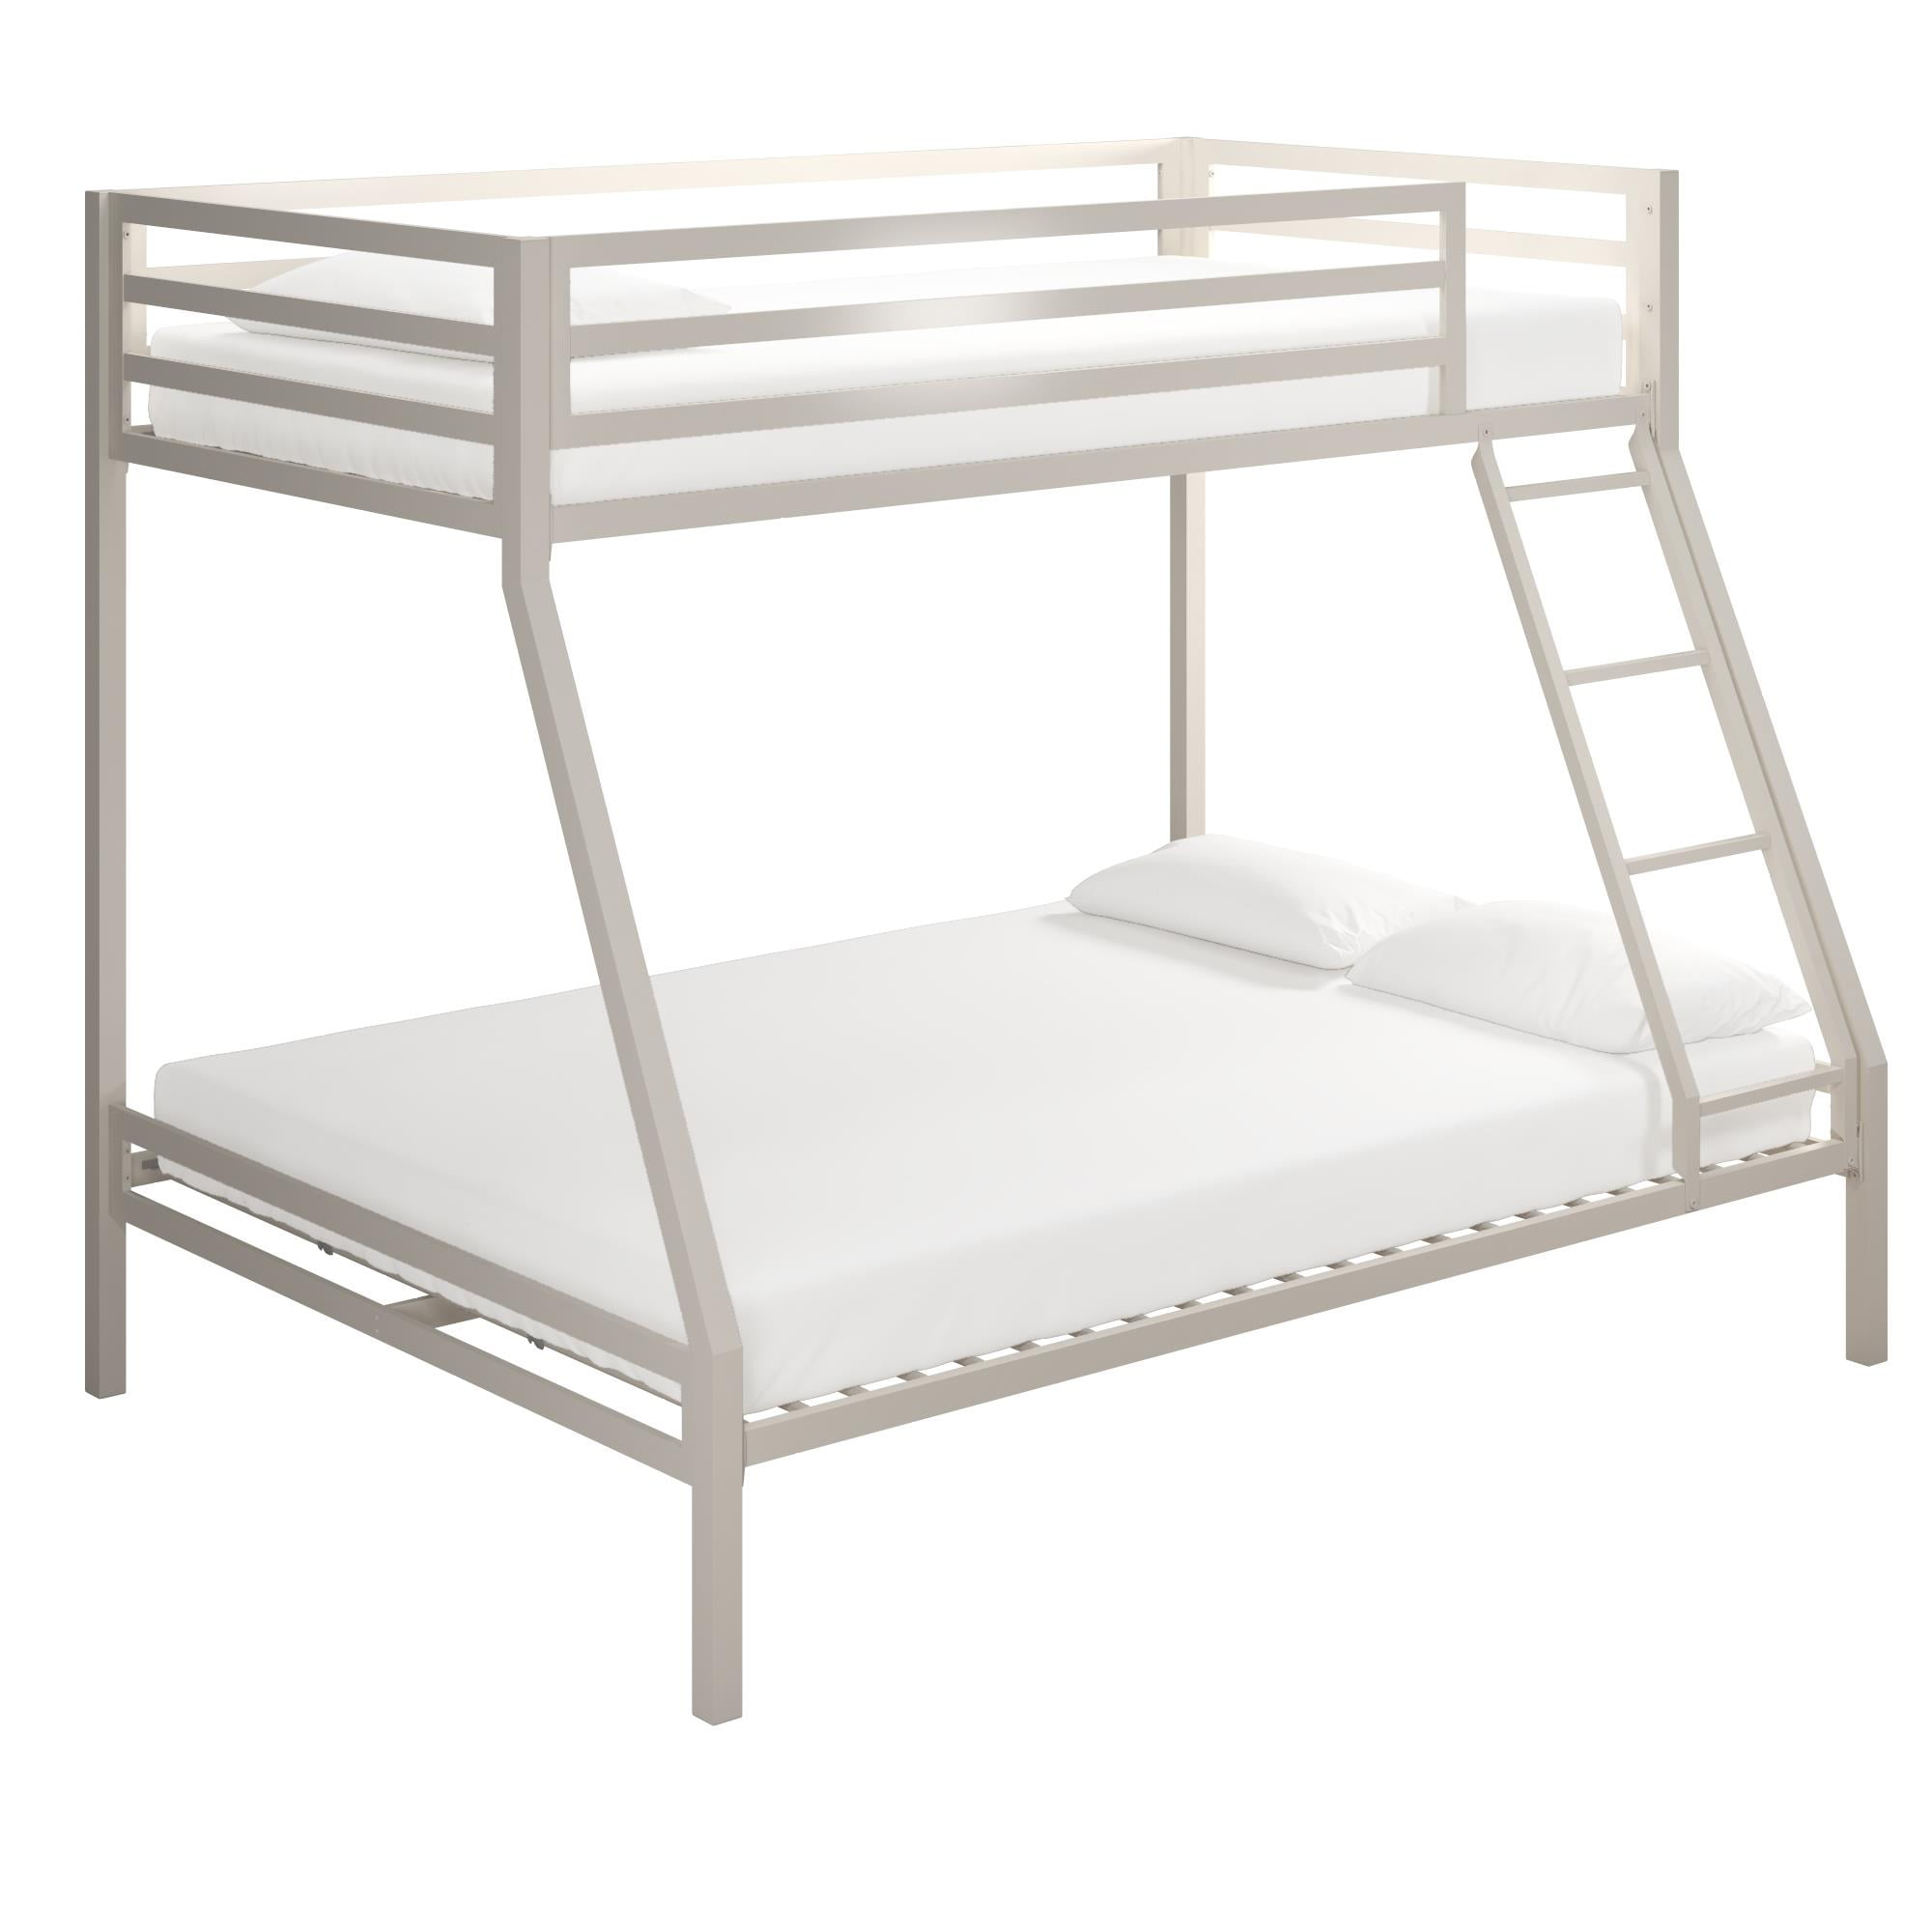 Mainstays Premium Twin Over Full Bunk Bed, Mainstays Premium Metal Twin Over Twin Bunk Bed